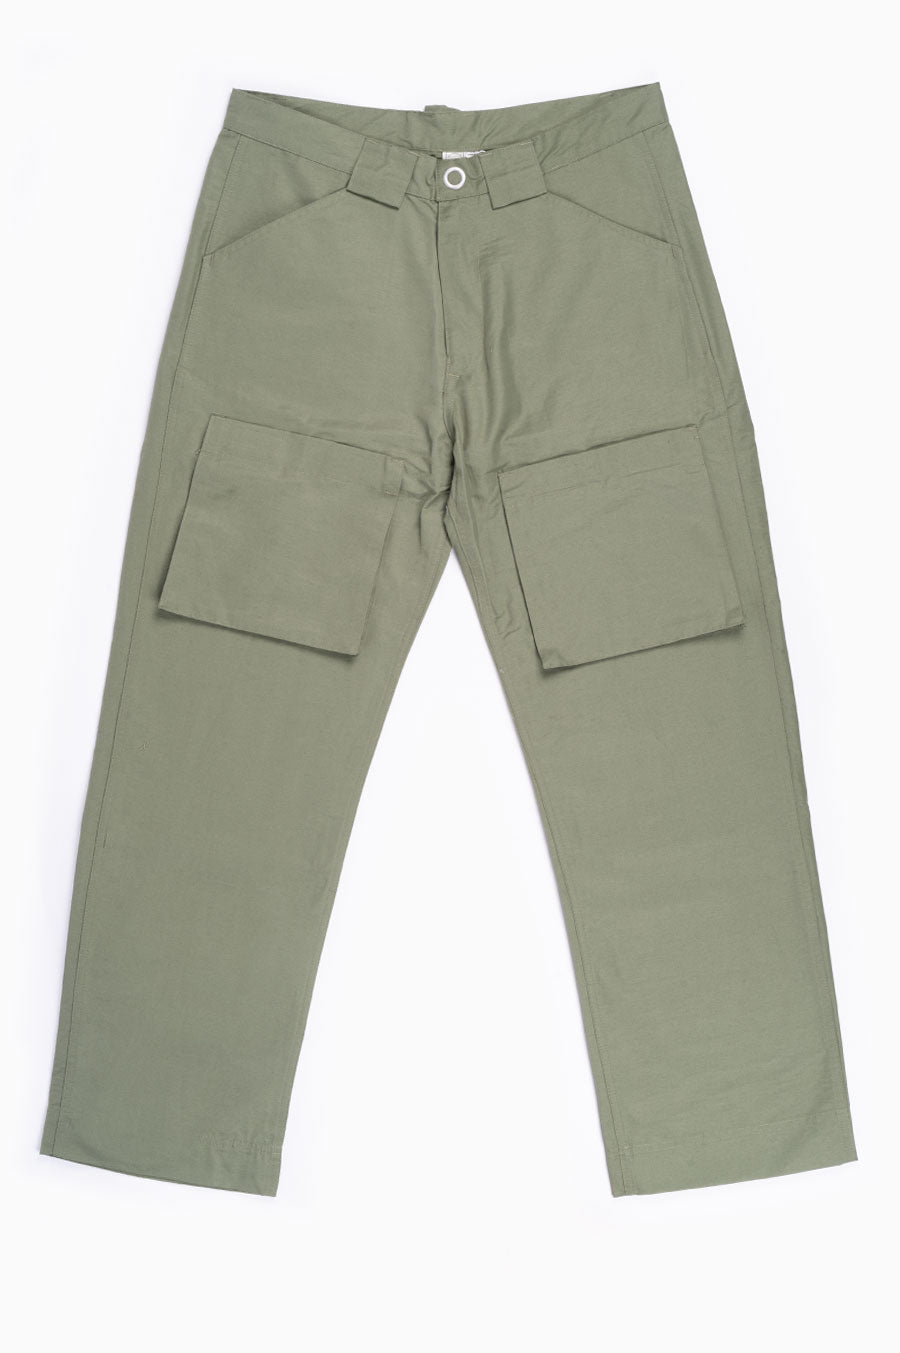 HOUSE OF PAA UTILITY PANT 1.5 OLIVE